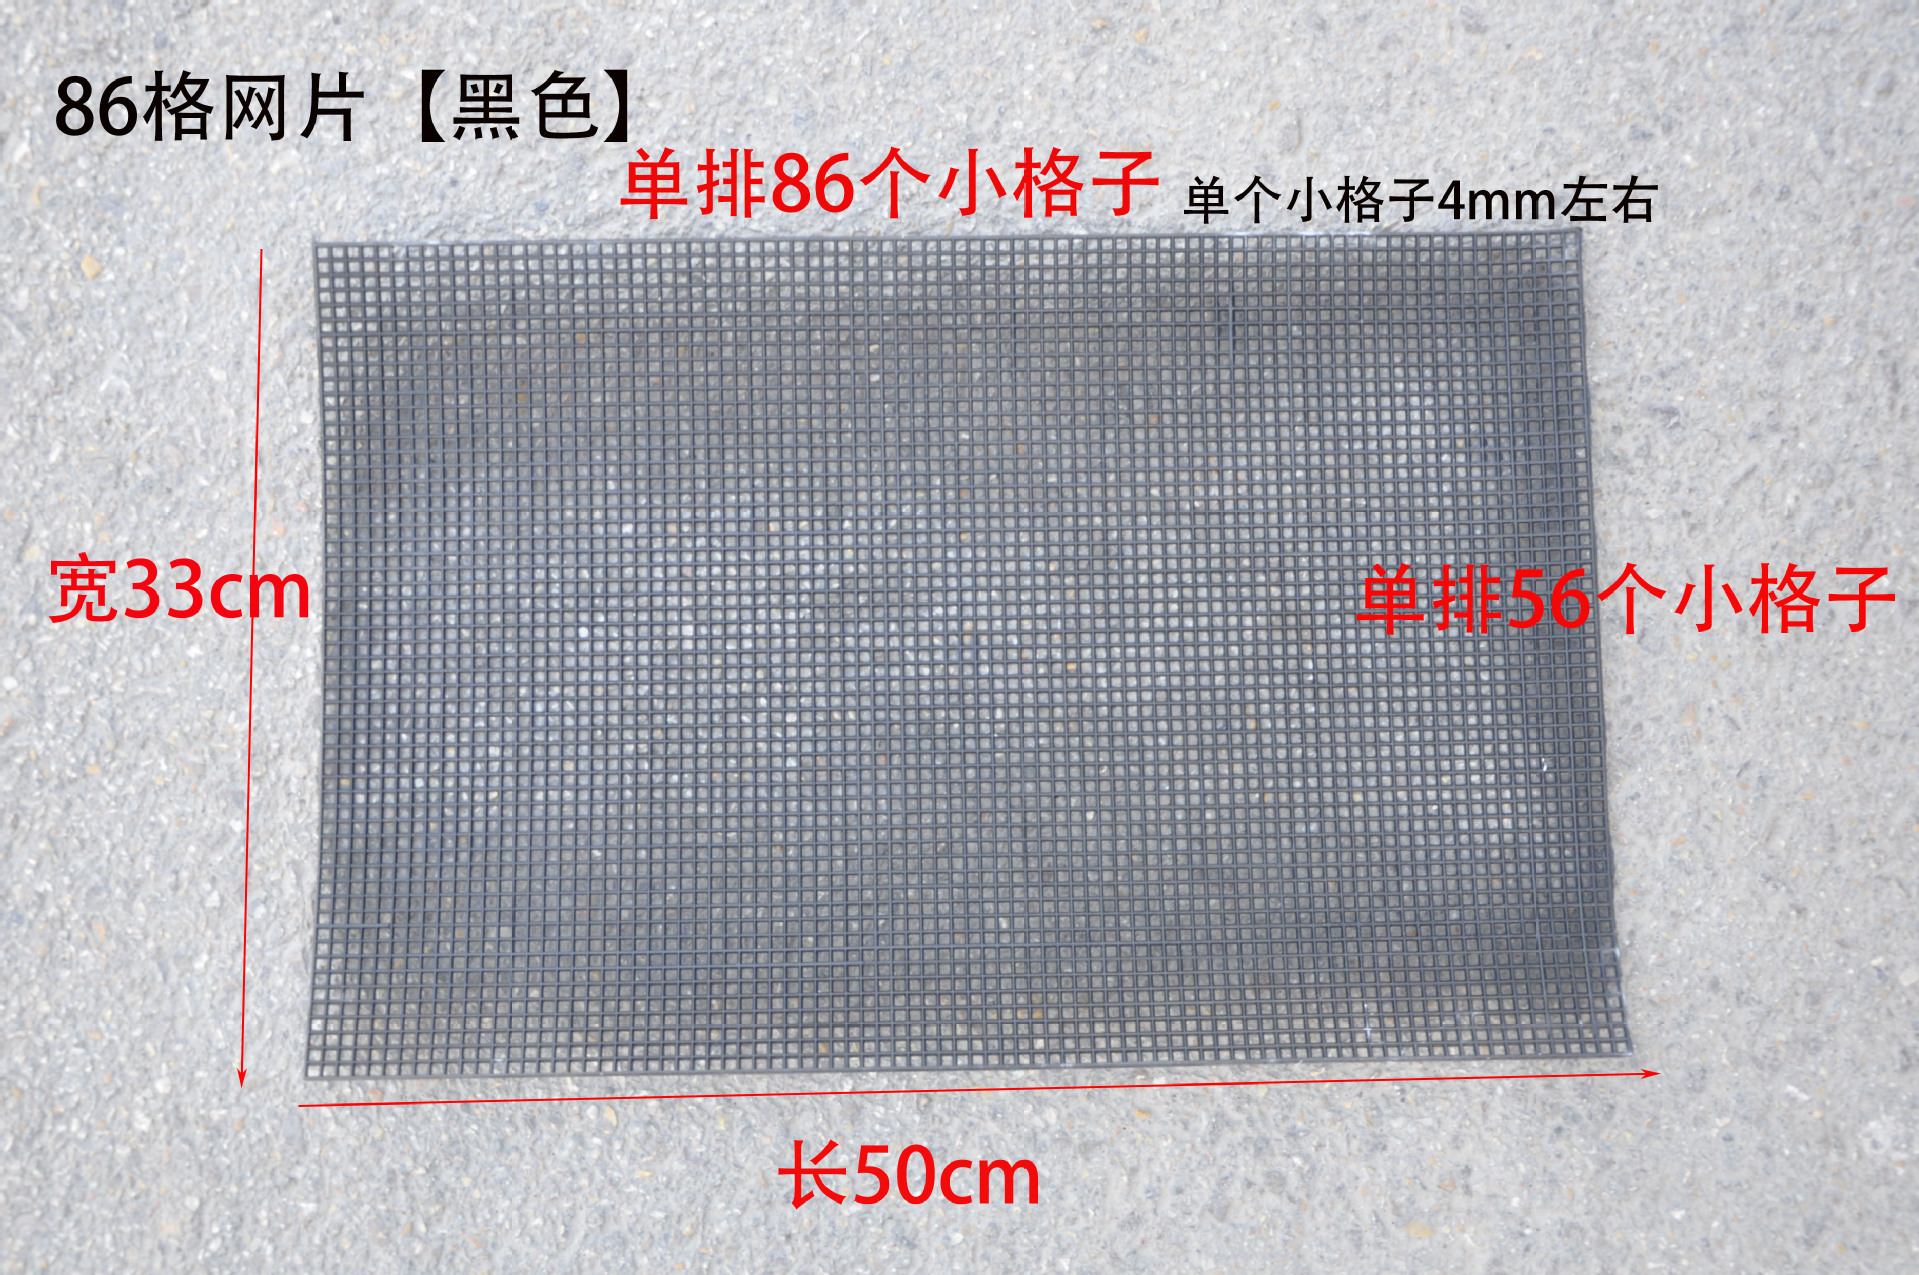 Handmade Dly Student Hand-Woven Plastic Mesh round Foreign Trade Supply Woven Bag Bottom Lining Cutting